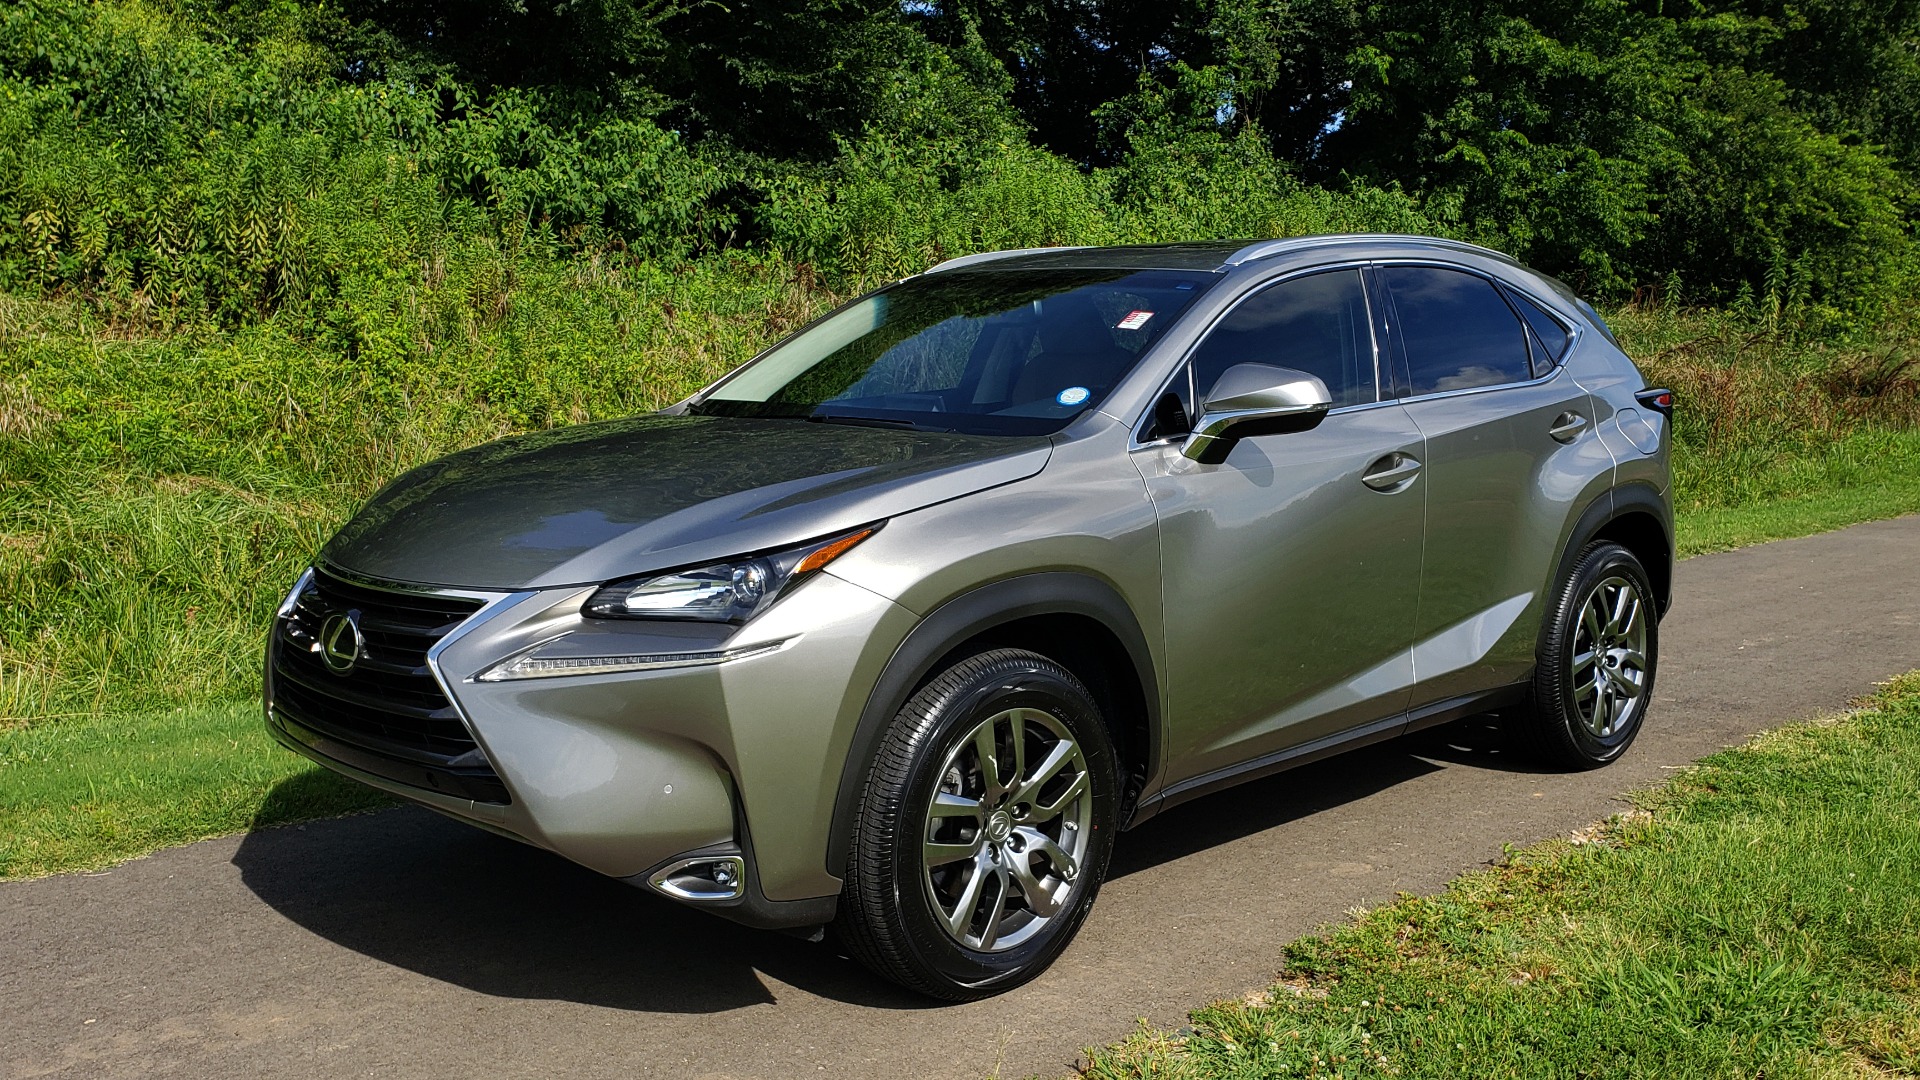 Used 2016 Lexus NX 200T FWD / PREMIUM PKG / SUNROOF / BSM / REARVIEW for sale Sold at Formula Imports in Charlotte NC 28227 1